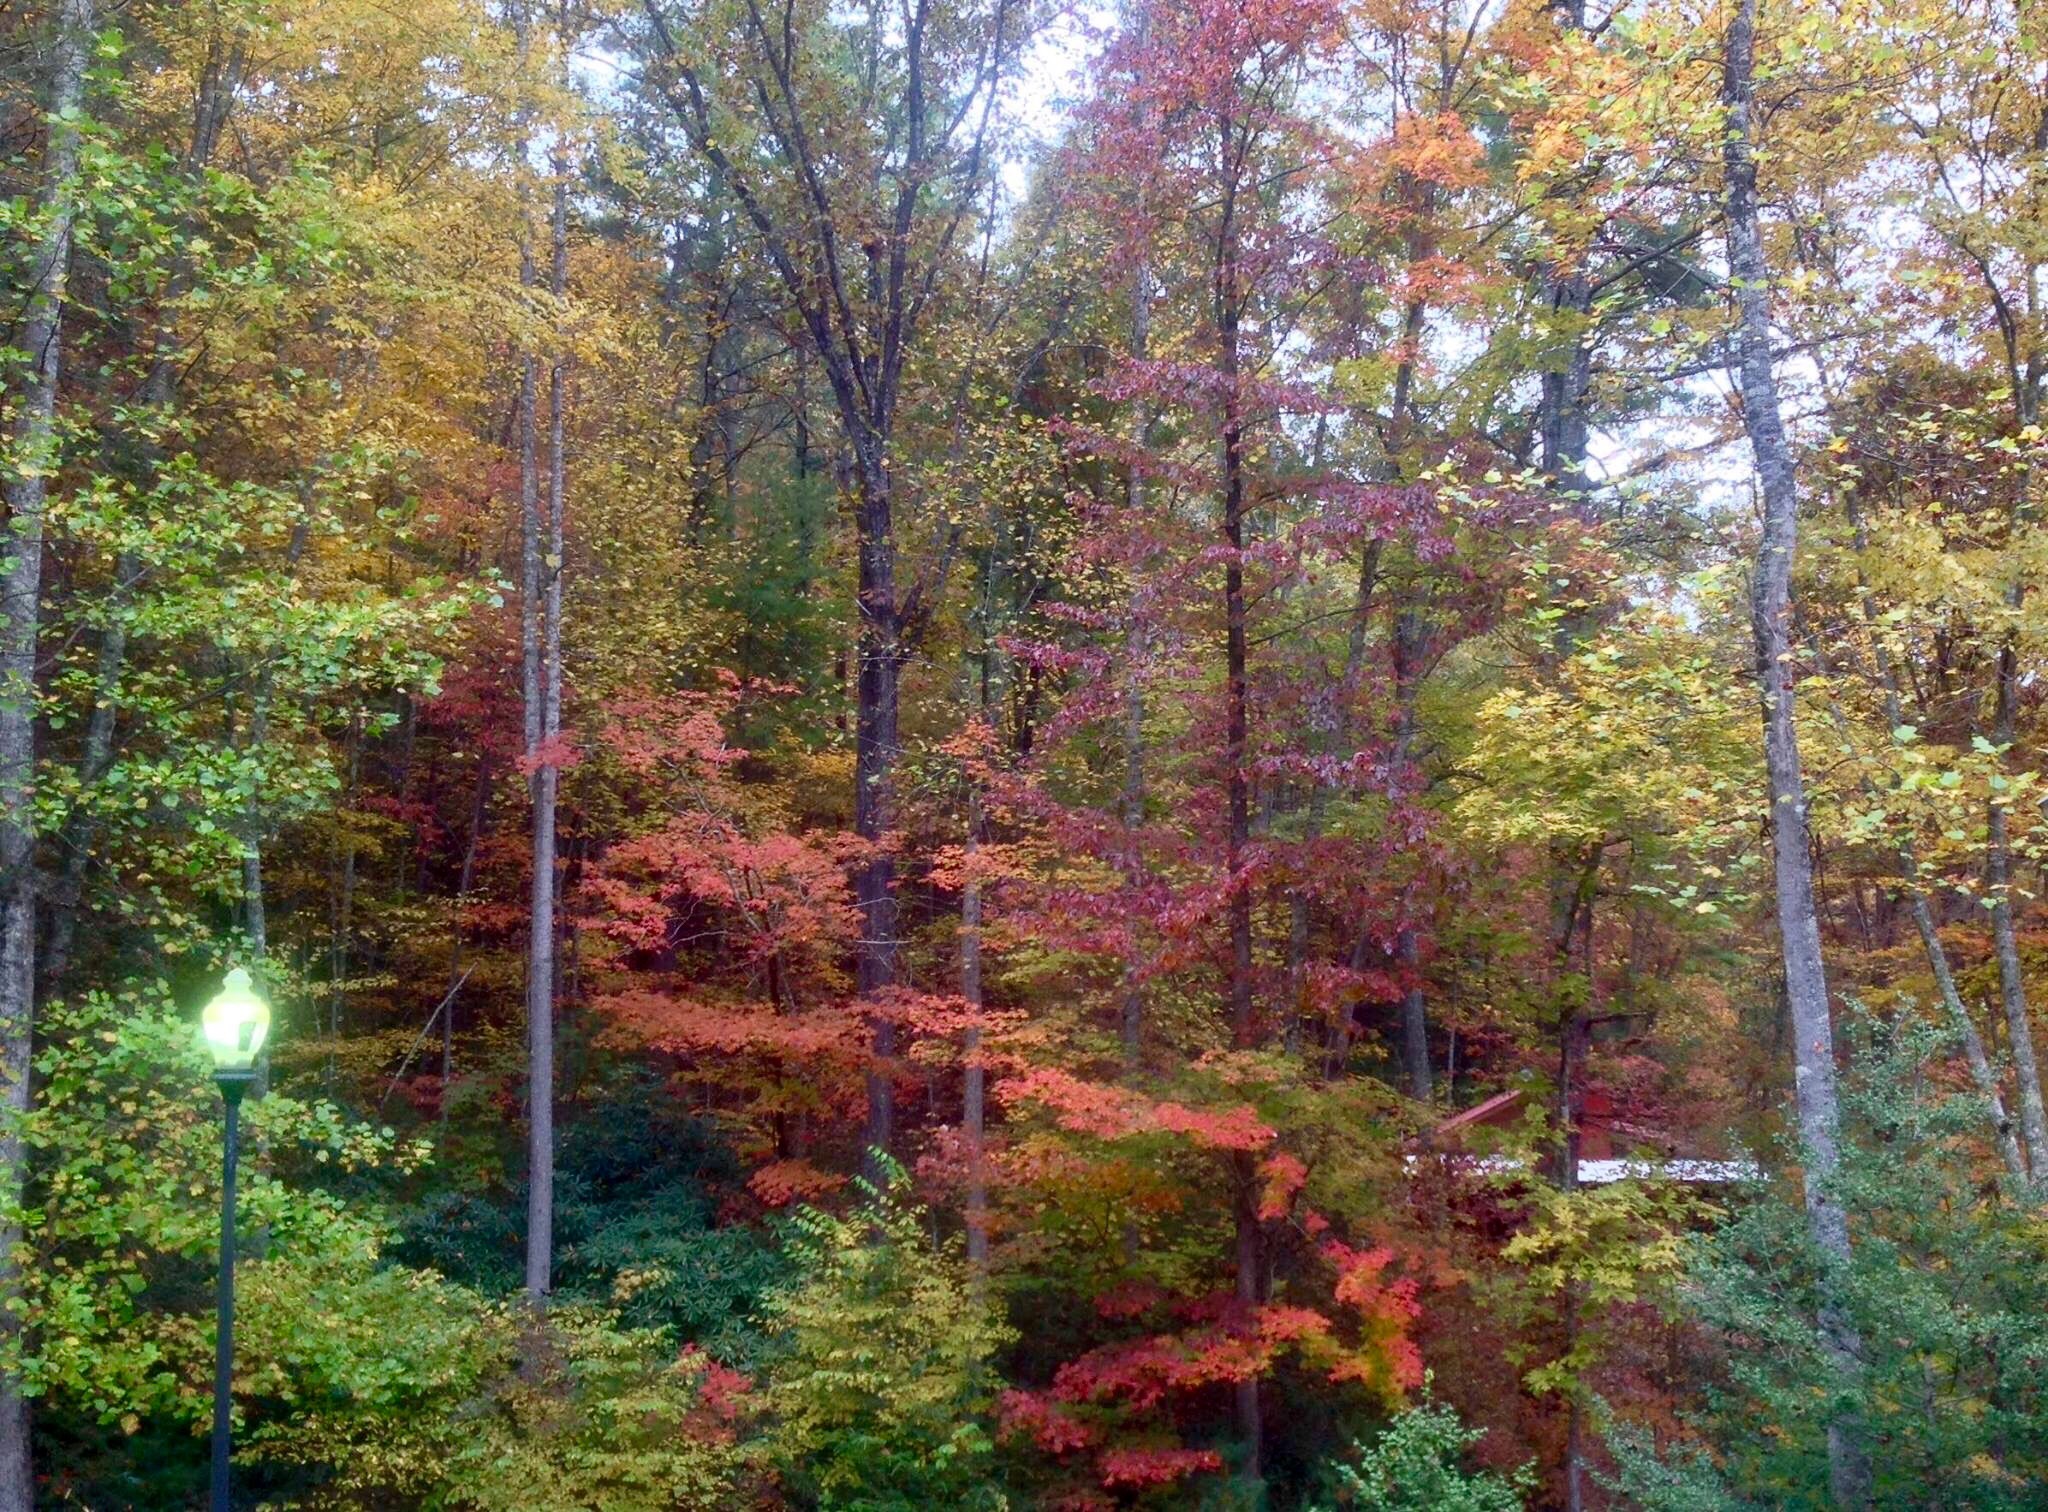 My Front Yard in the Fall